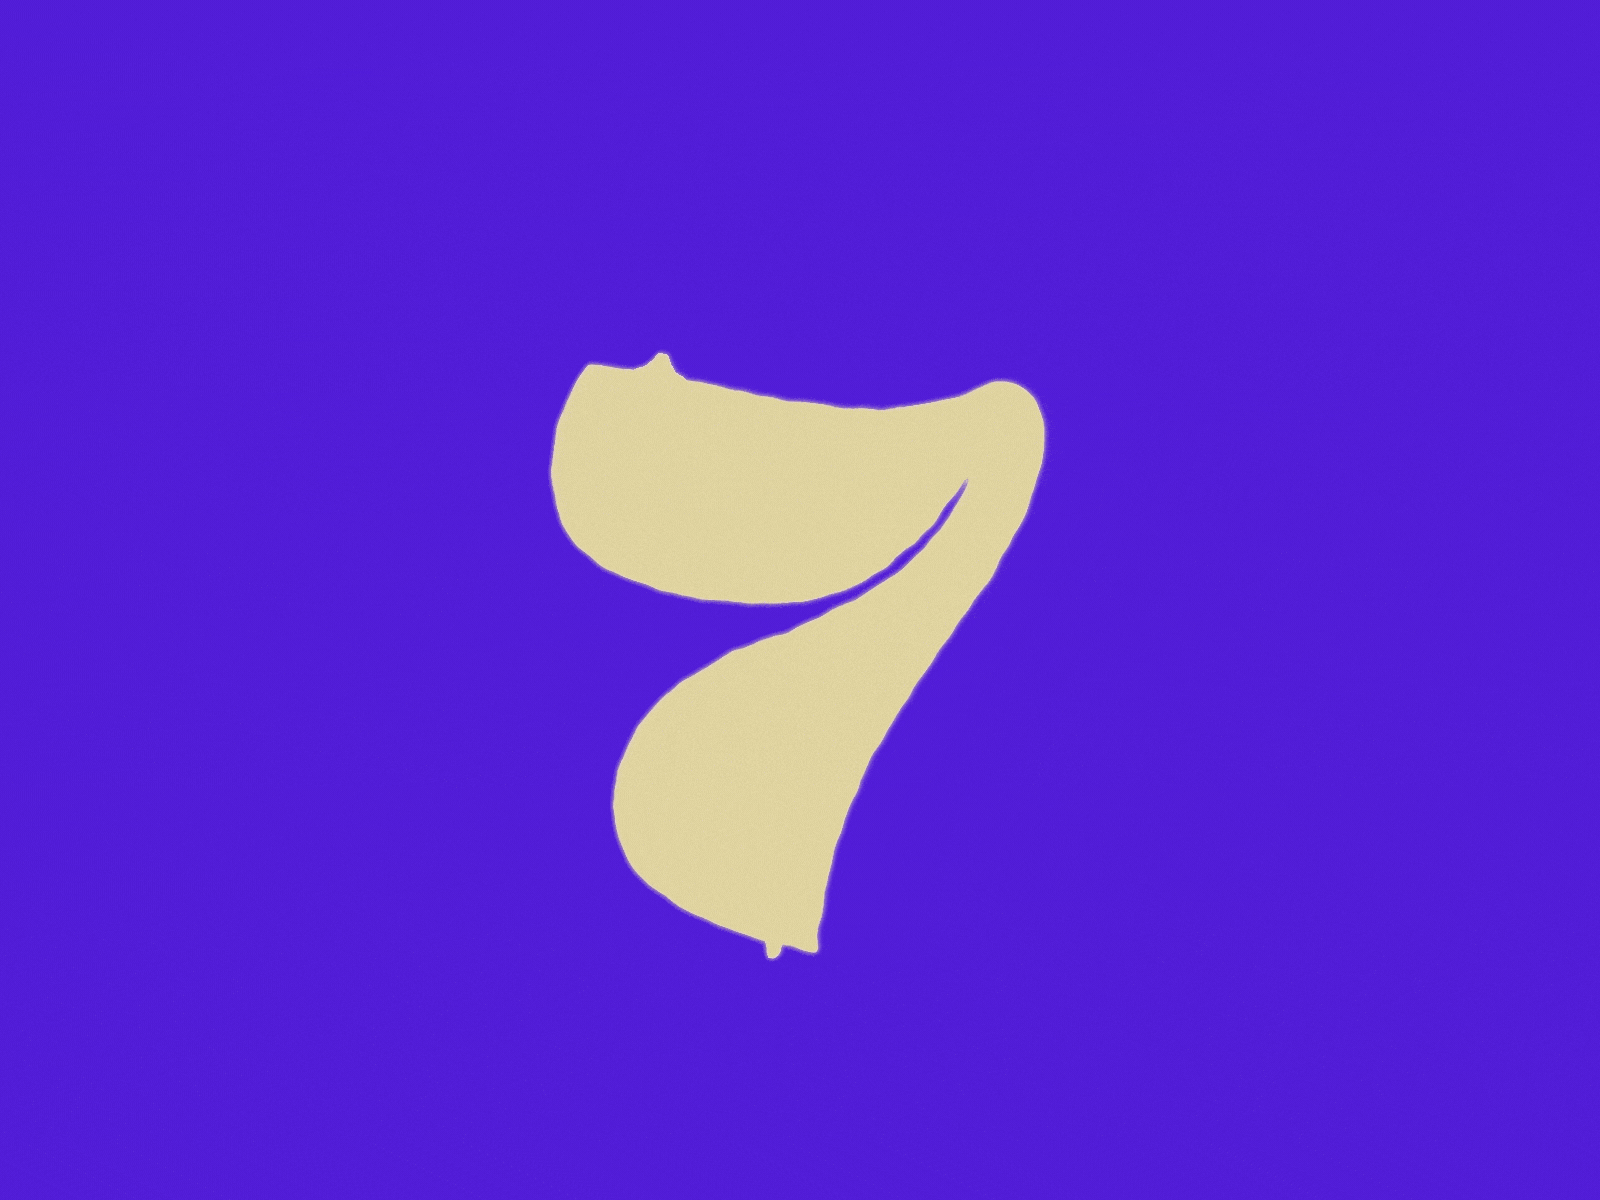 36 Days of Type Number 7